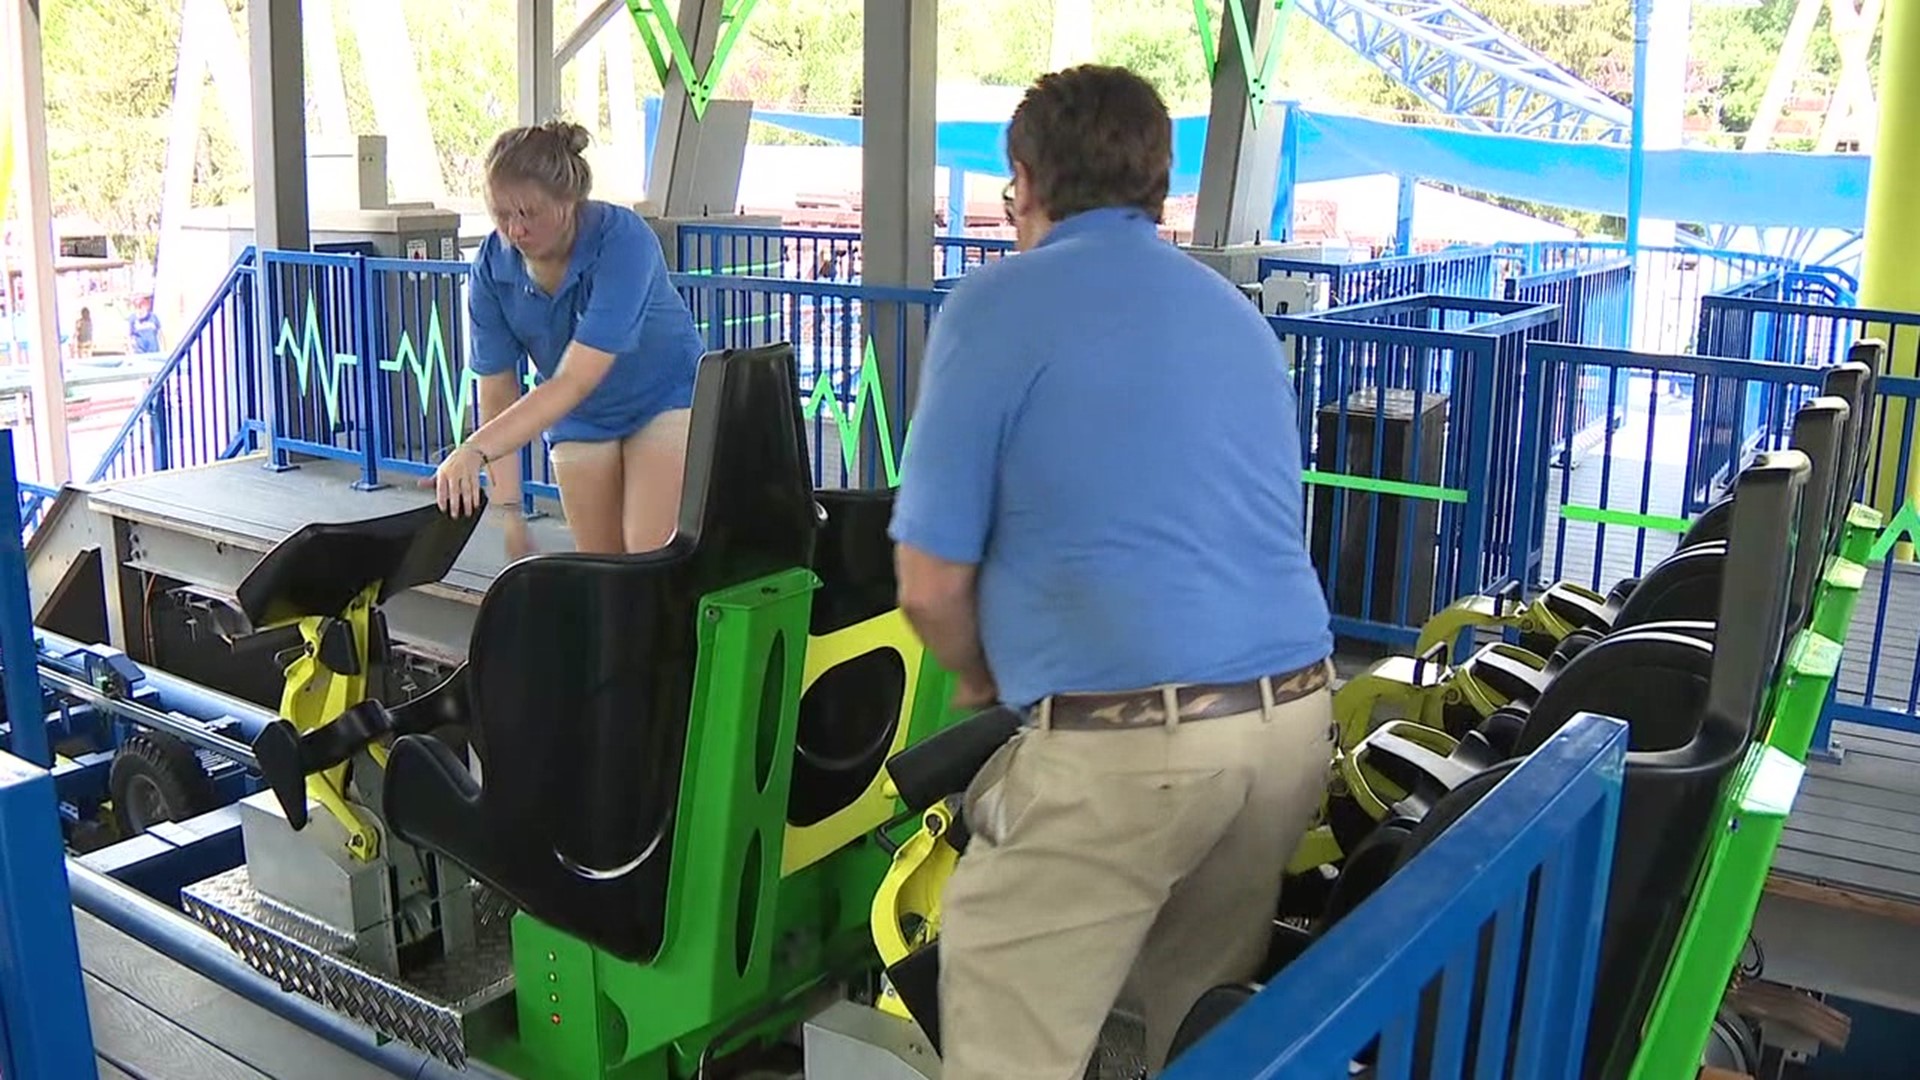 Knoebels Amusement Resort announced wage increases for new and returning seasonal employees.